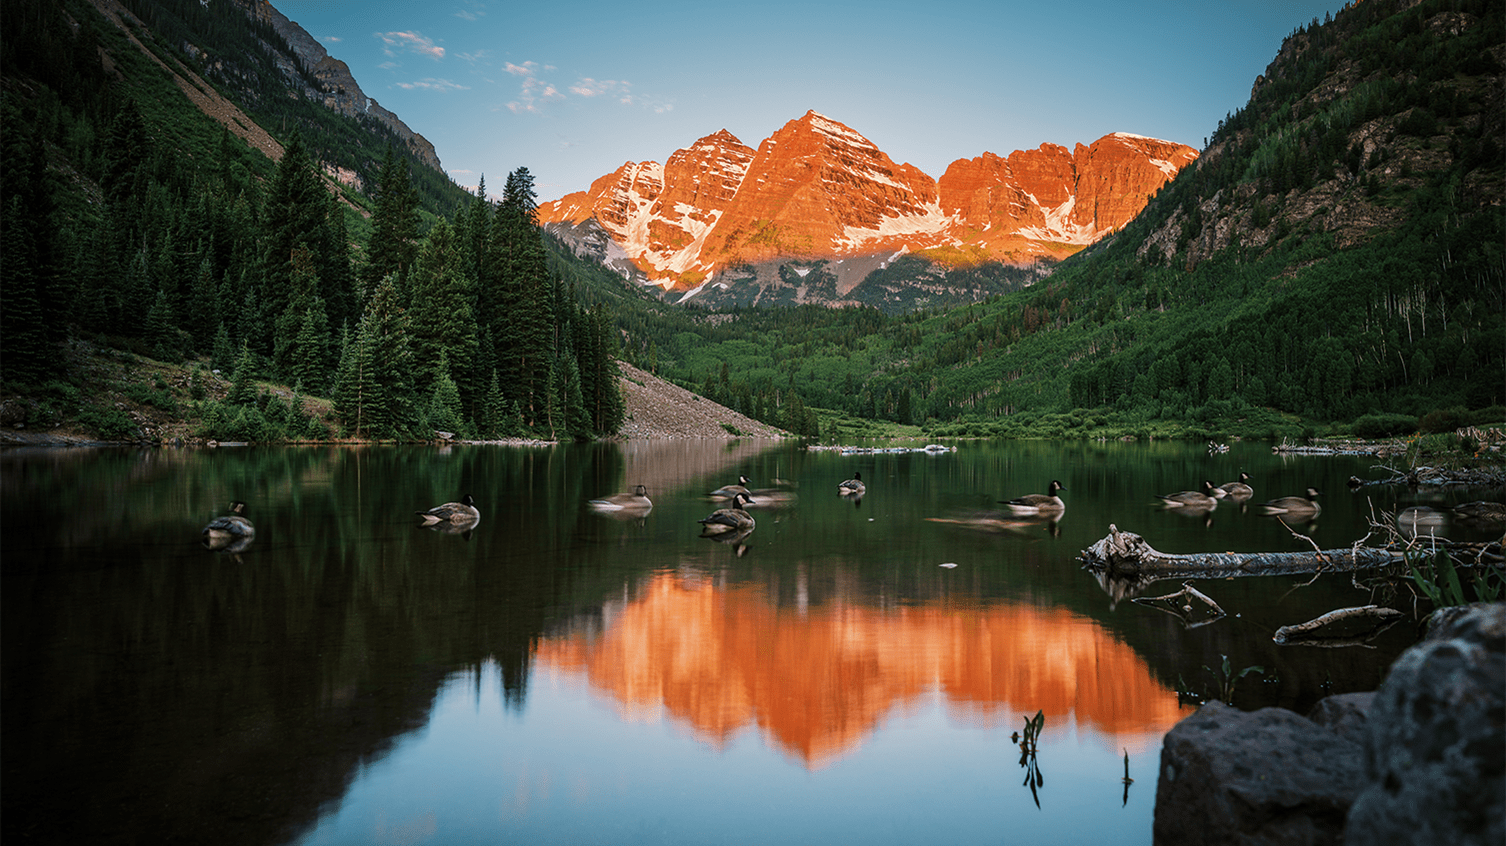 Dawn sun hits the Maroon Bells, Geese swim in the shade in the lake at the base